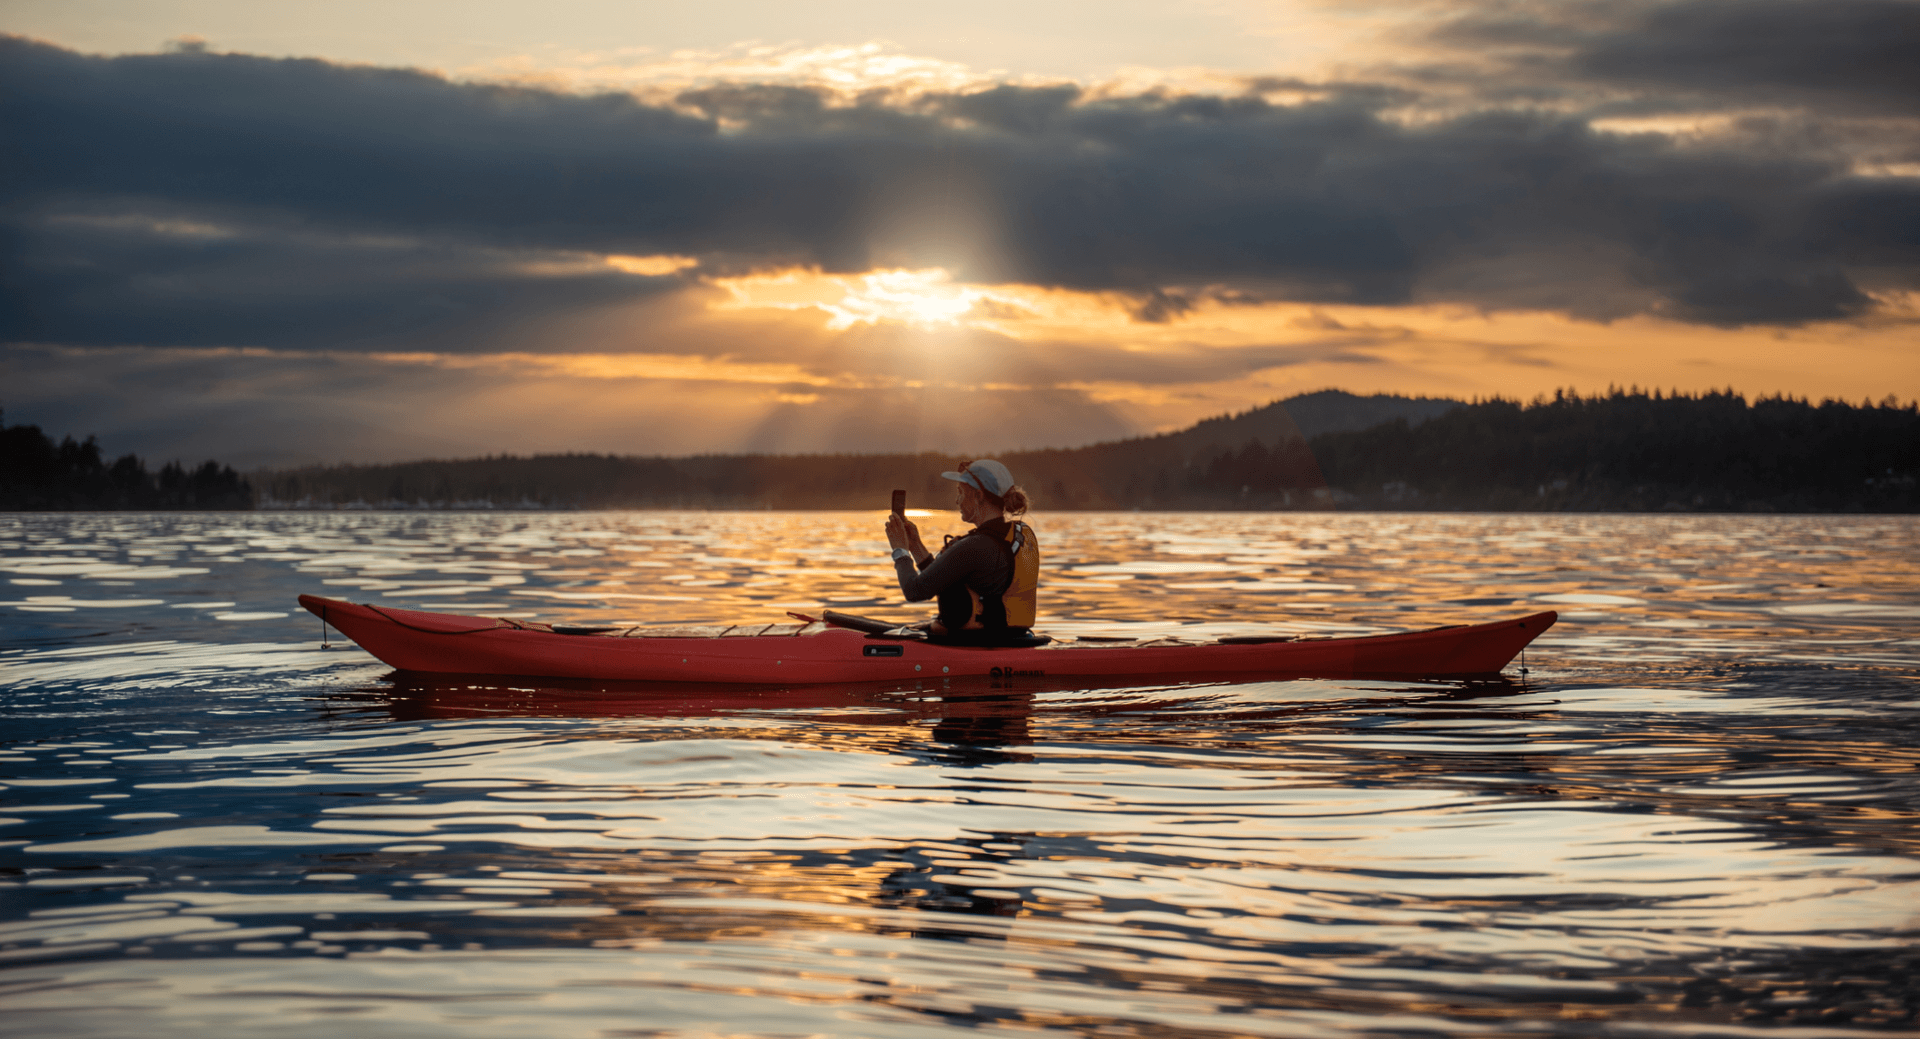 A kayaker in the water in Sidney, BC